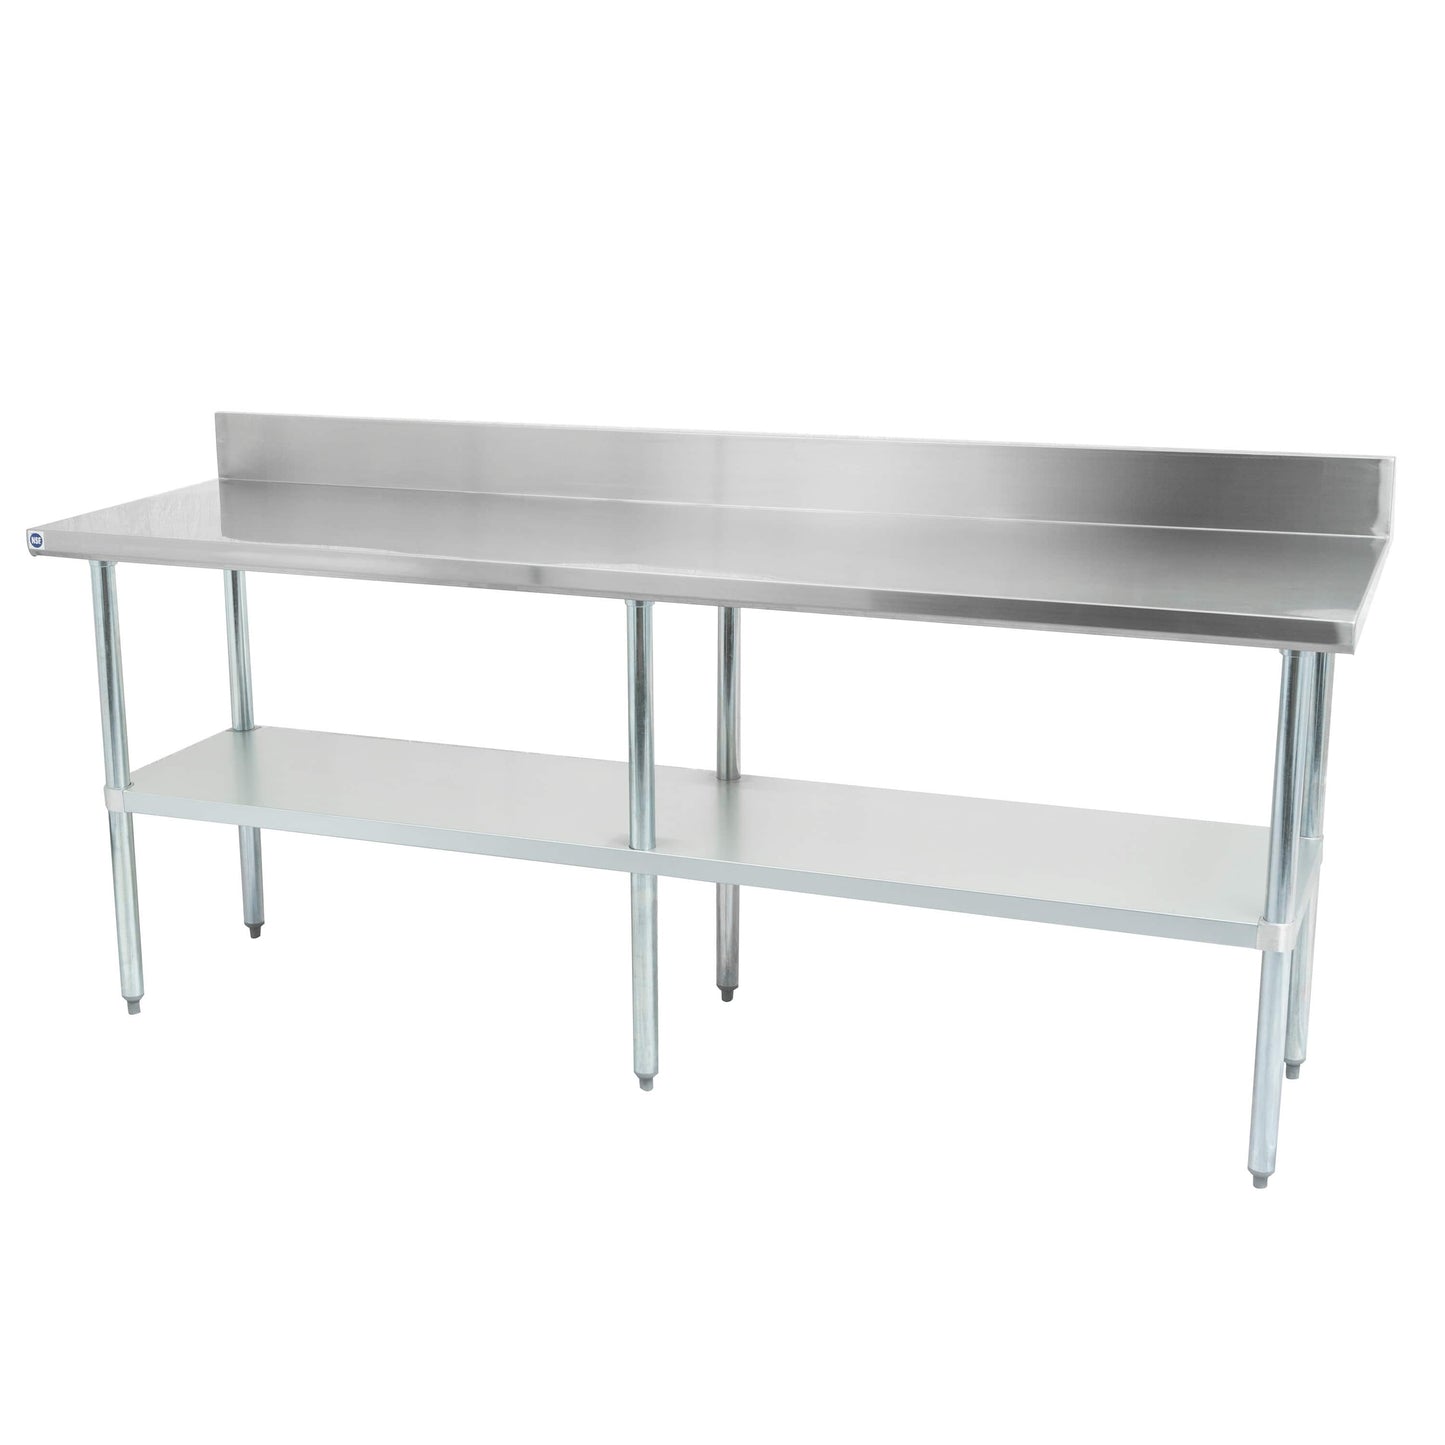 Thorinox DSST-2484-BK Table, 84"W x 24"D x 39"H, Stainless Steel Table with Backsplash and Galvanized Shelf